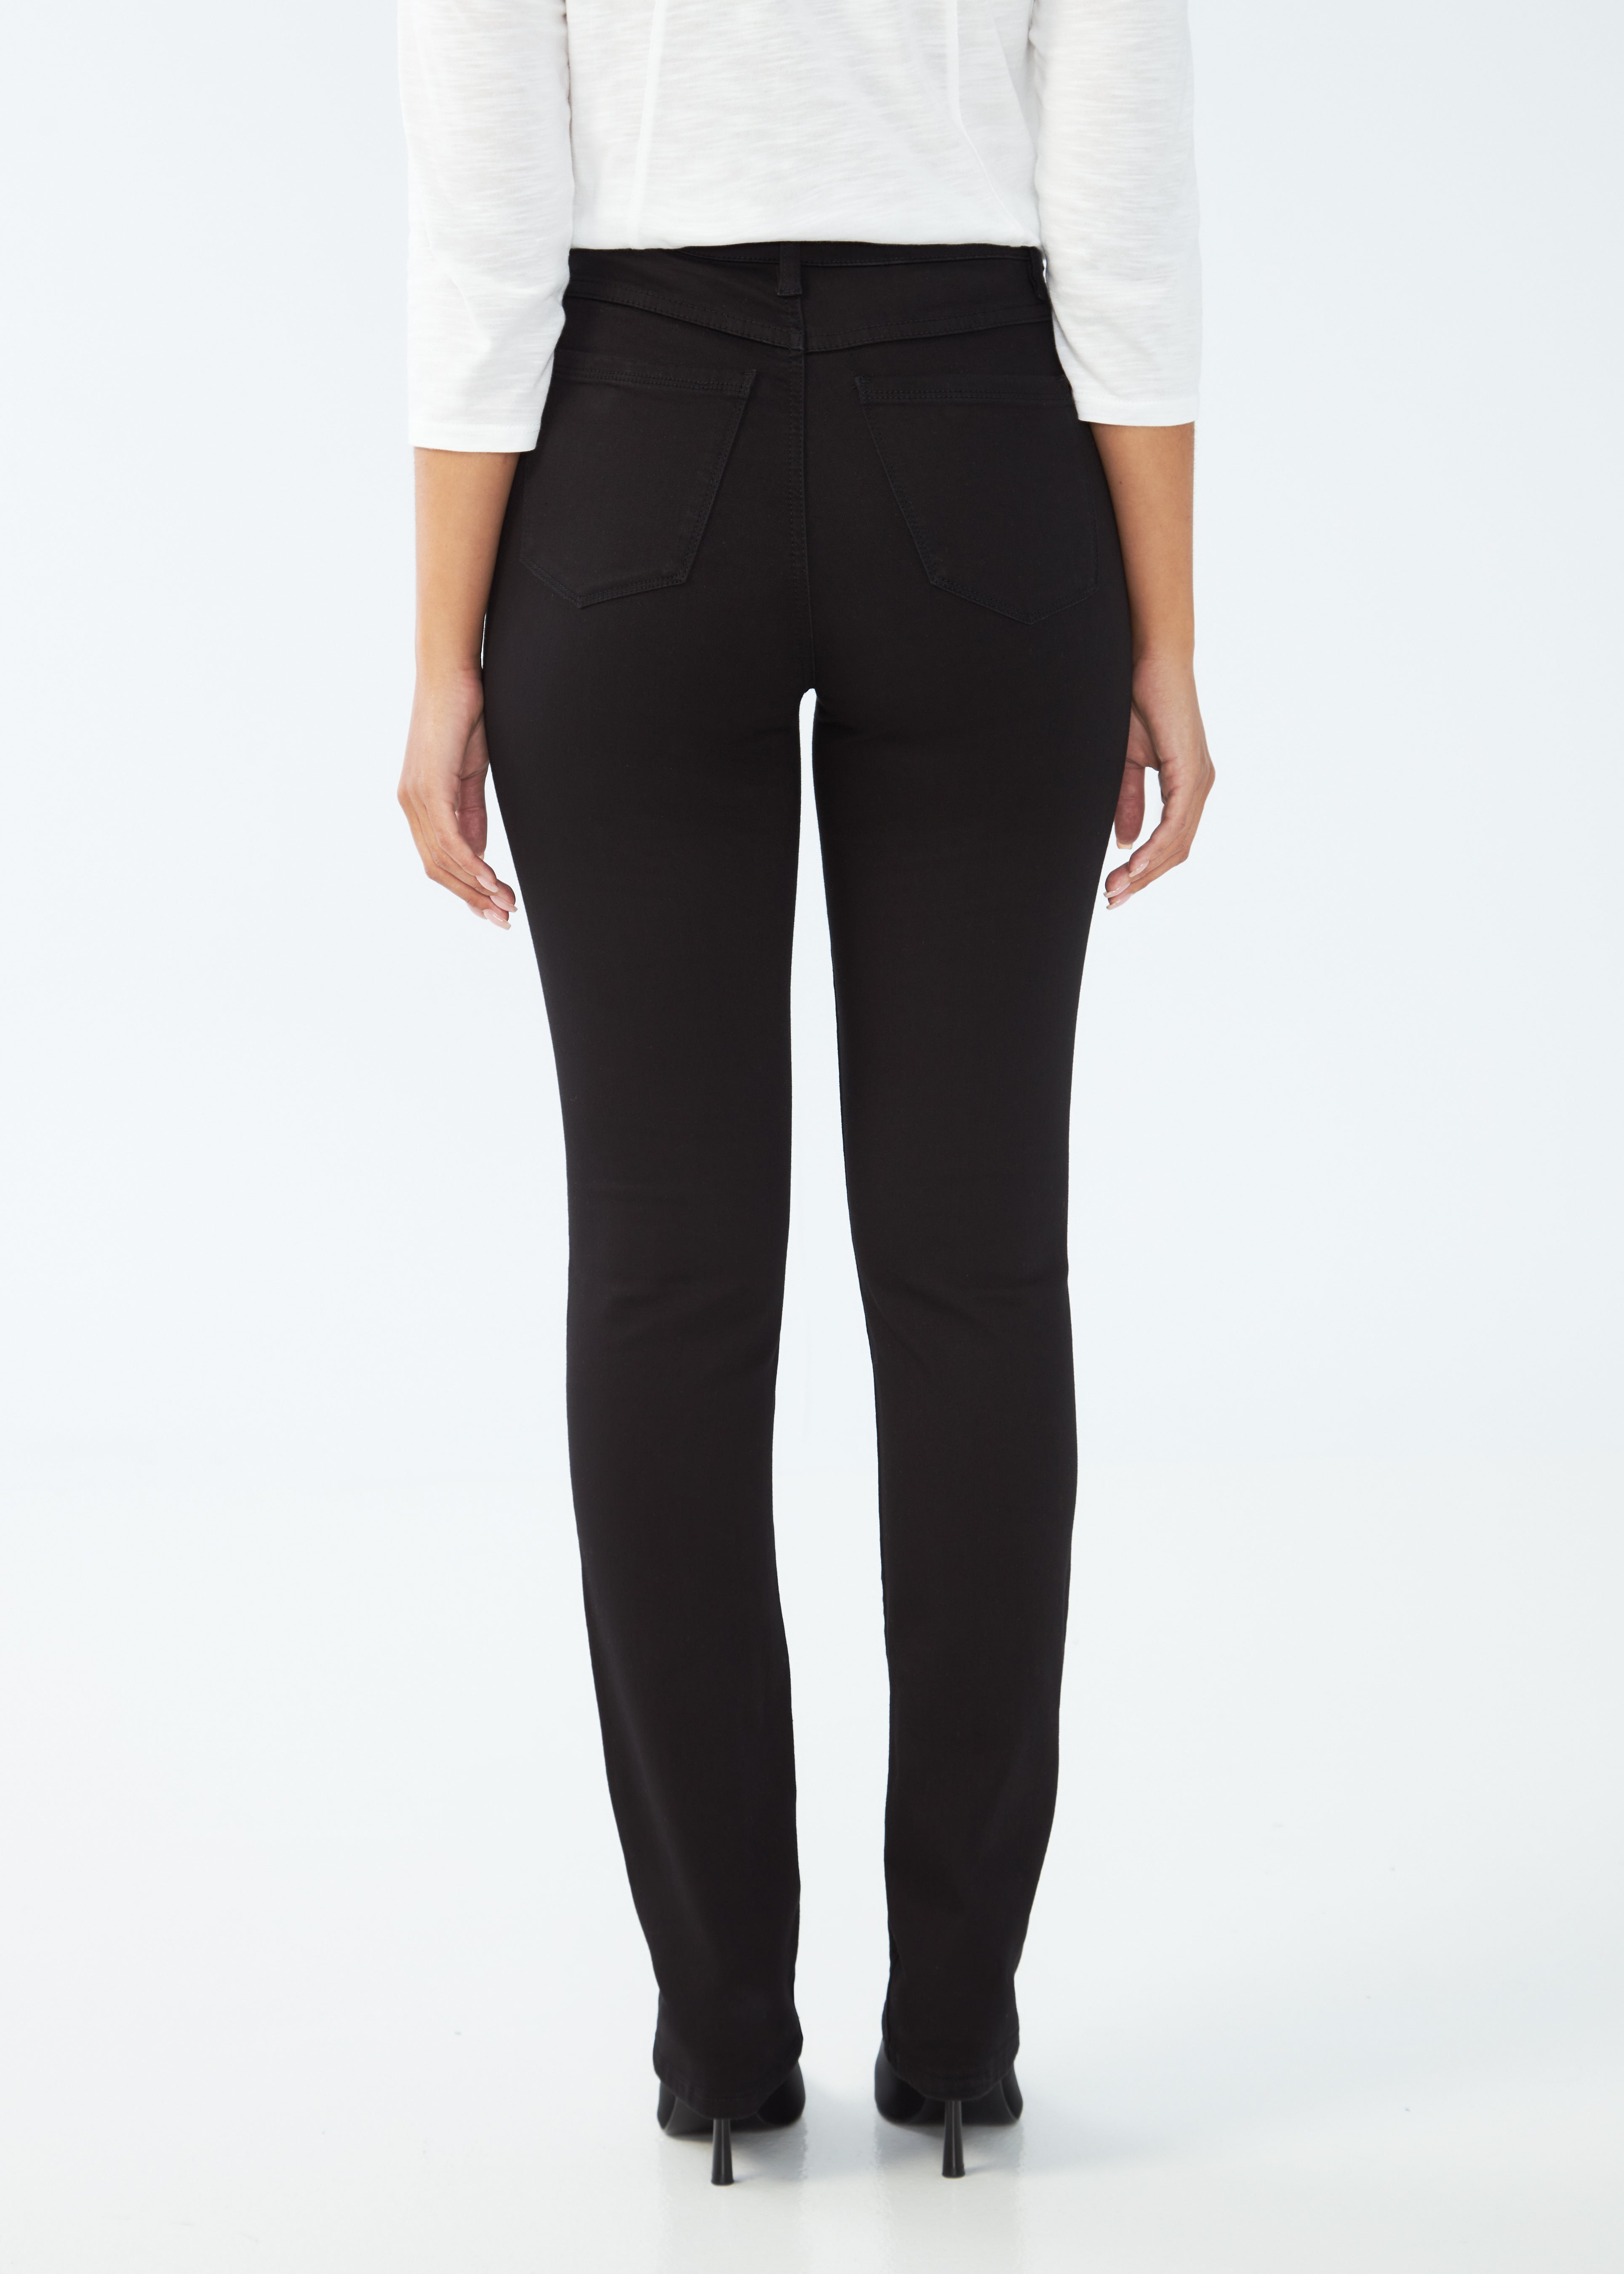 No wardrobe is complete without spectacular black jeans! For women with slimmer curves, consider our super-flattering Suzanne Onyx Denim. Available in petite.